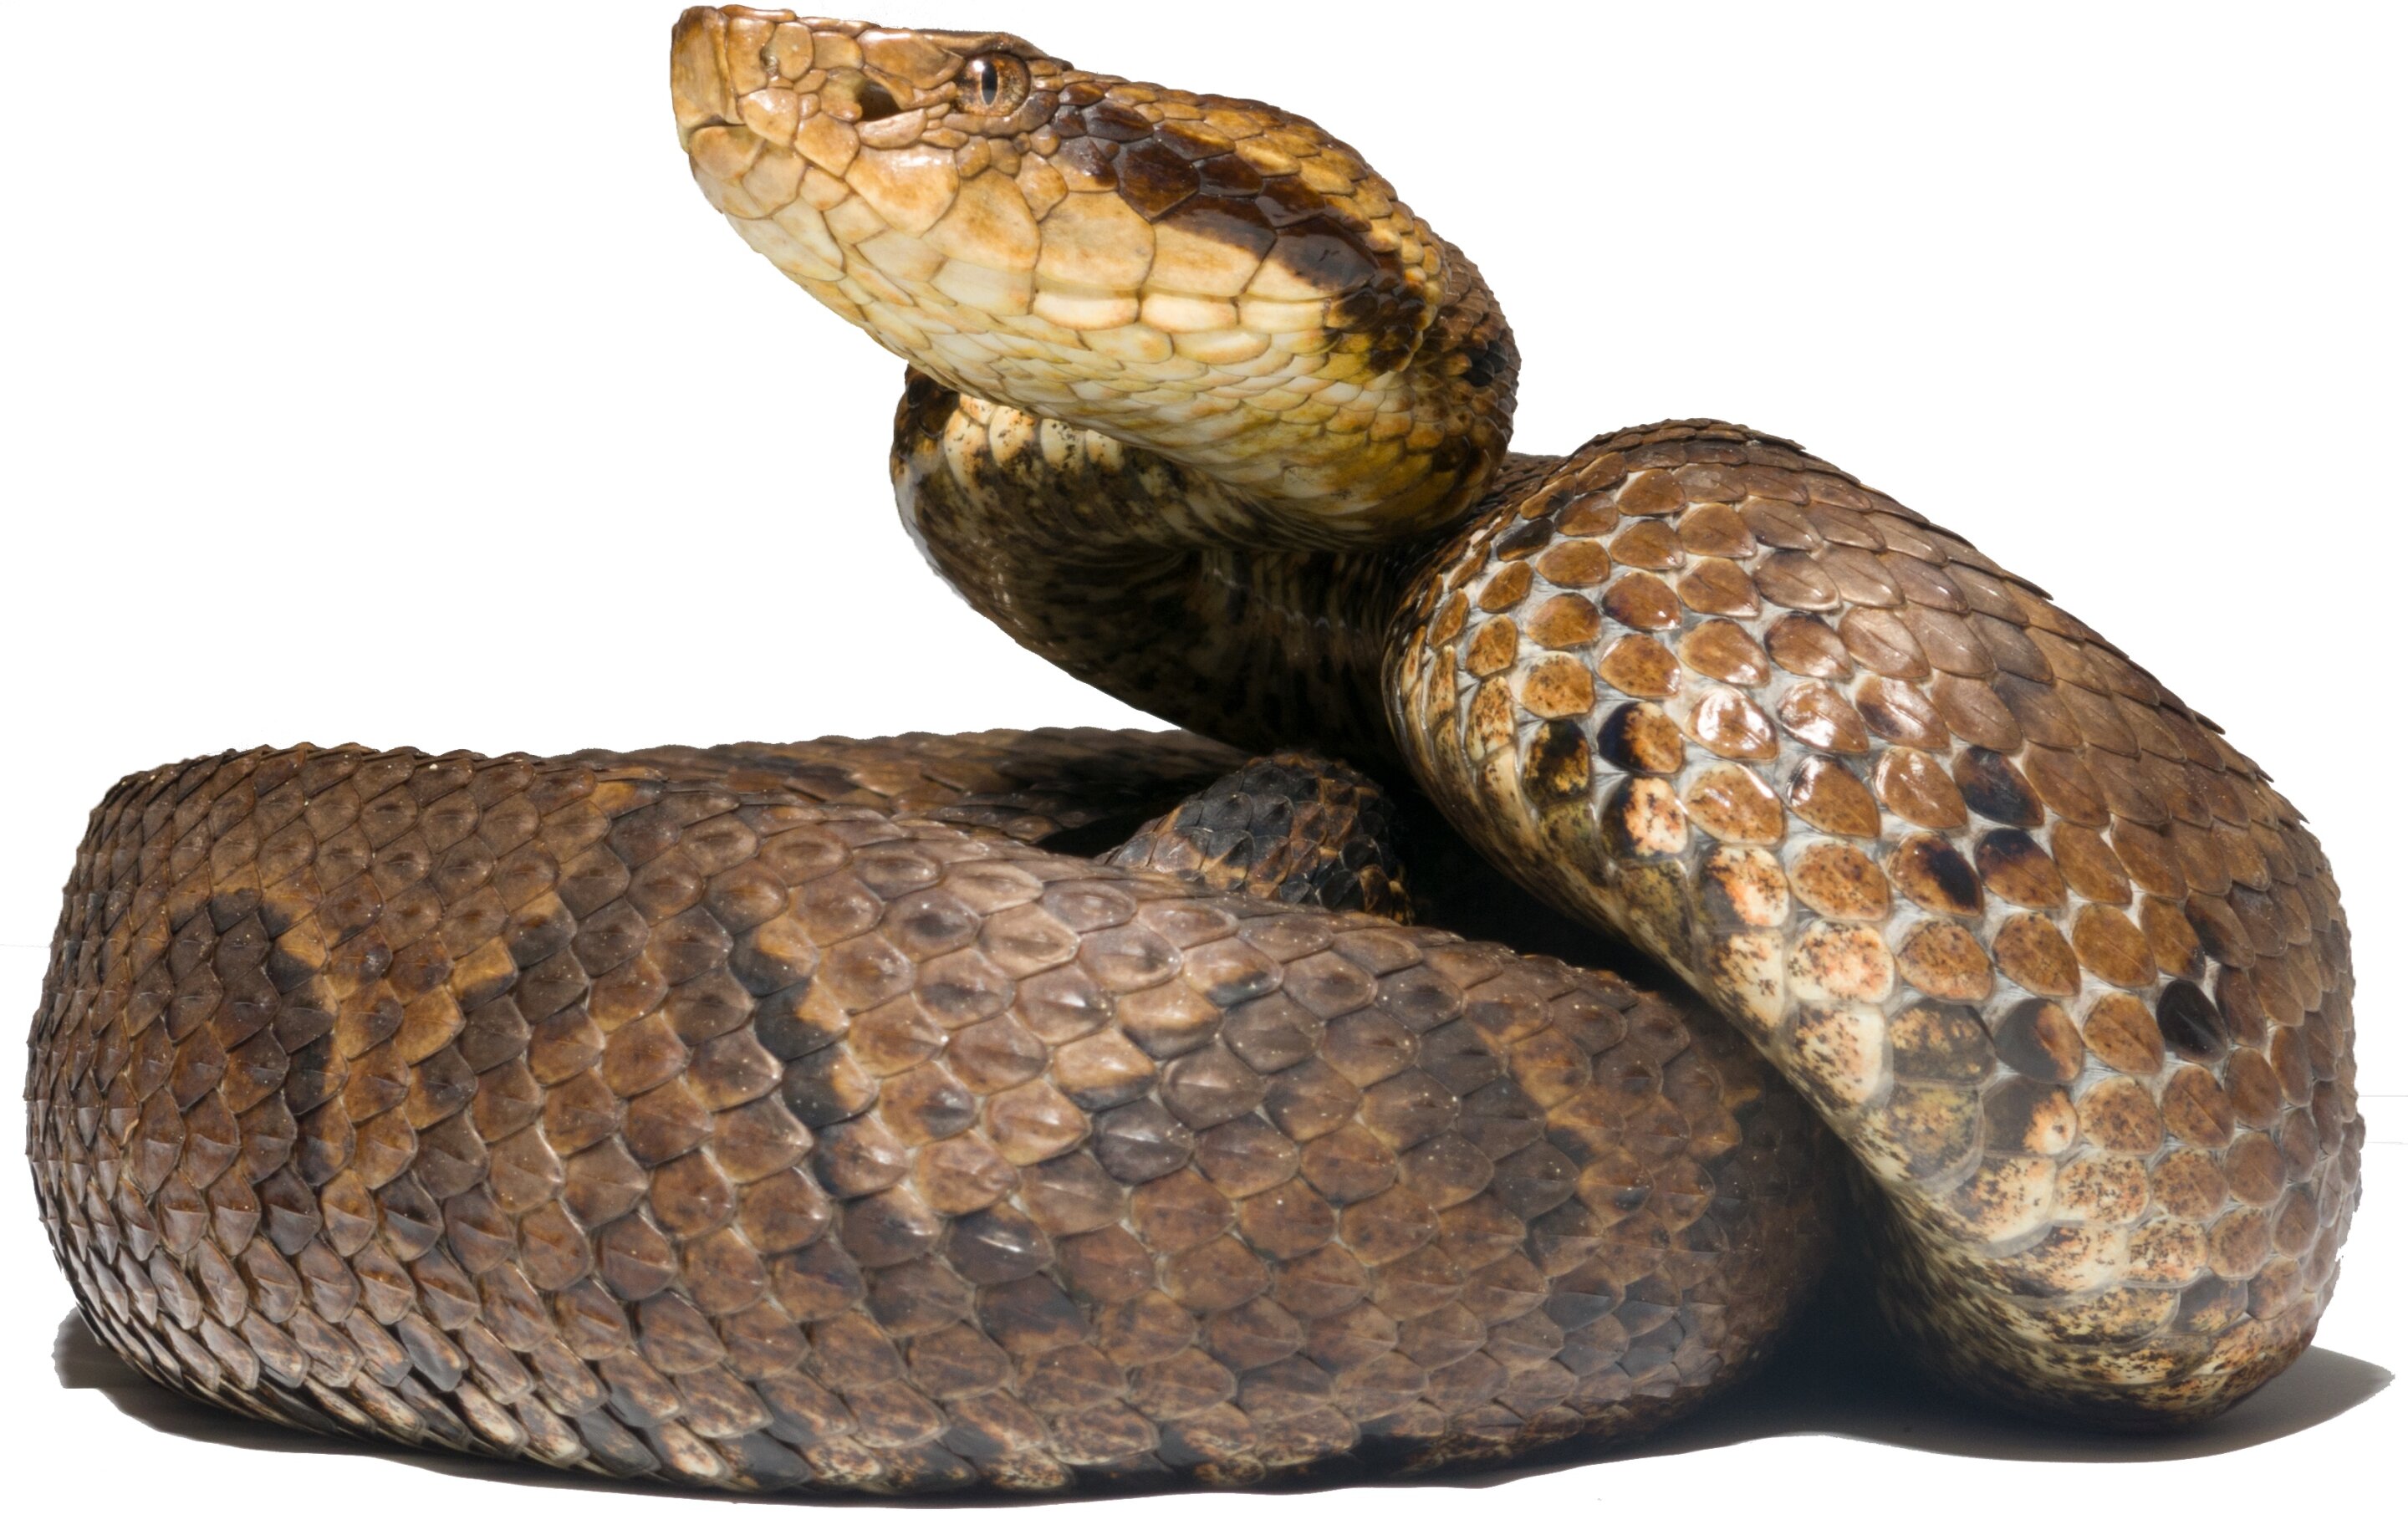 New venomous snakes discovered in Colombia: Taxonomic classification  facilitates medical help in case of snakebites